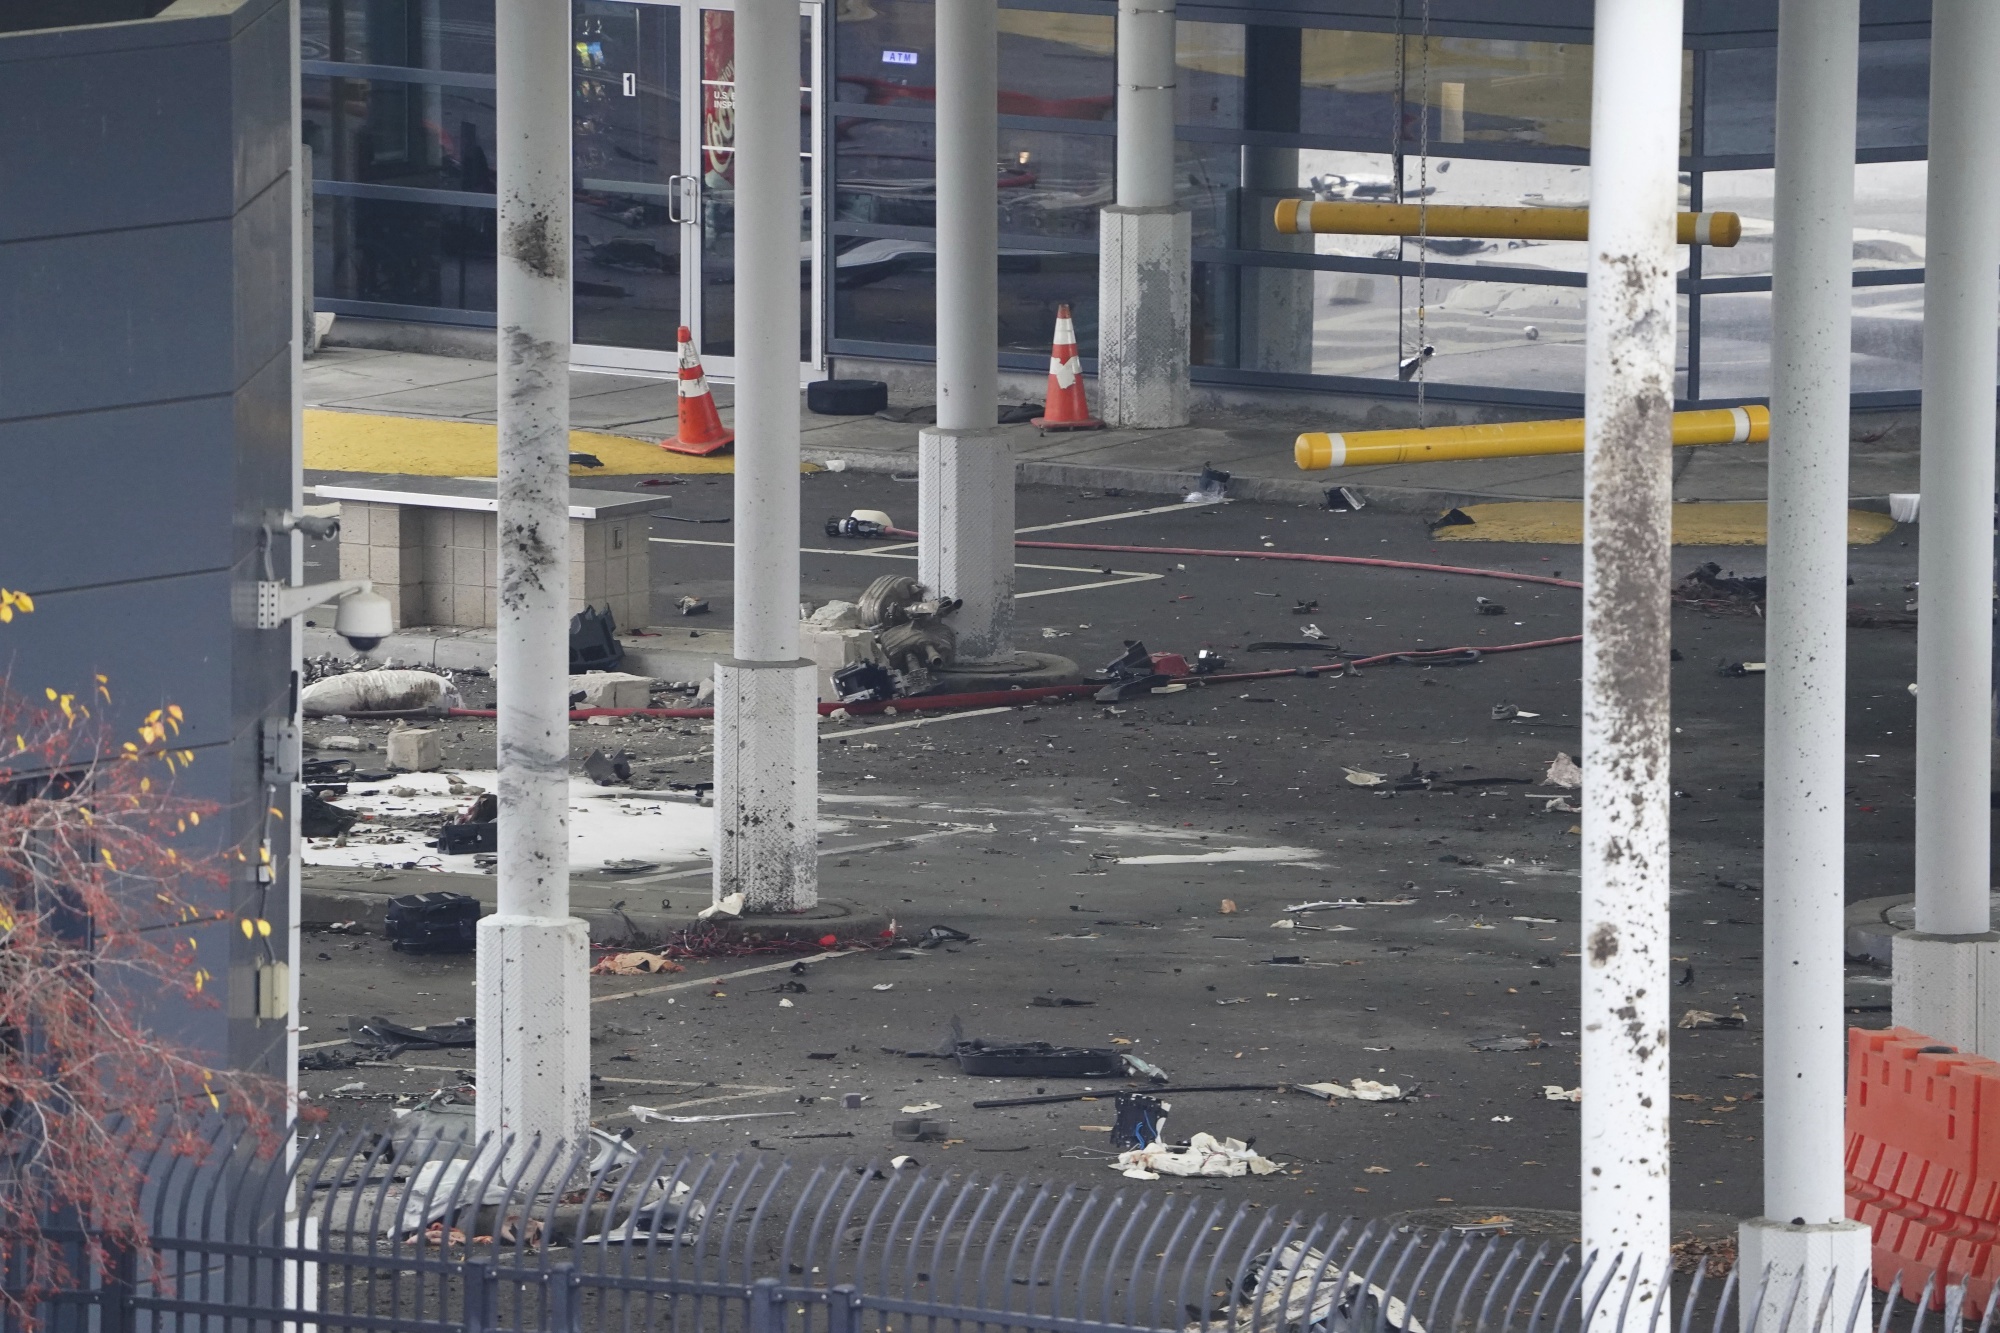 Debris is scattered about inside the customs plaza at the Rainbow Bridge border crossing on Nov. 22.Photographer: Derek Gee/The Buffalo News/AP